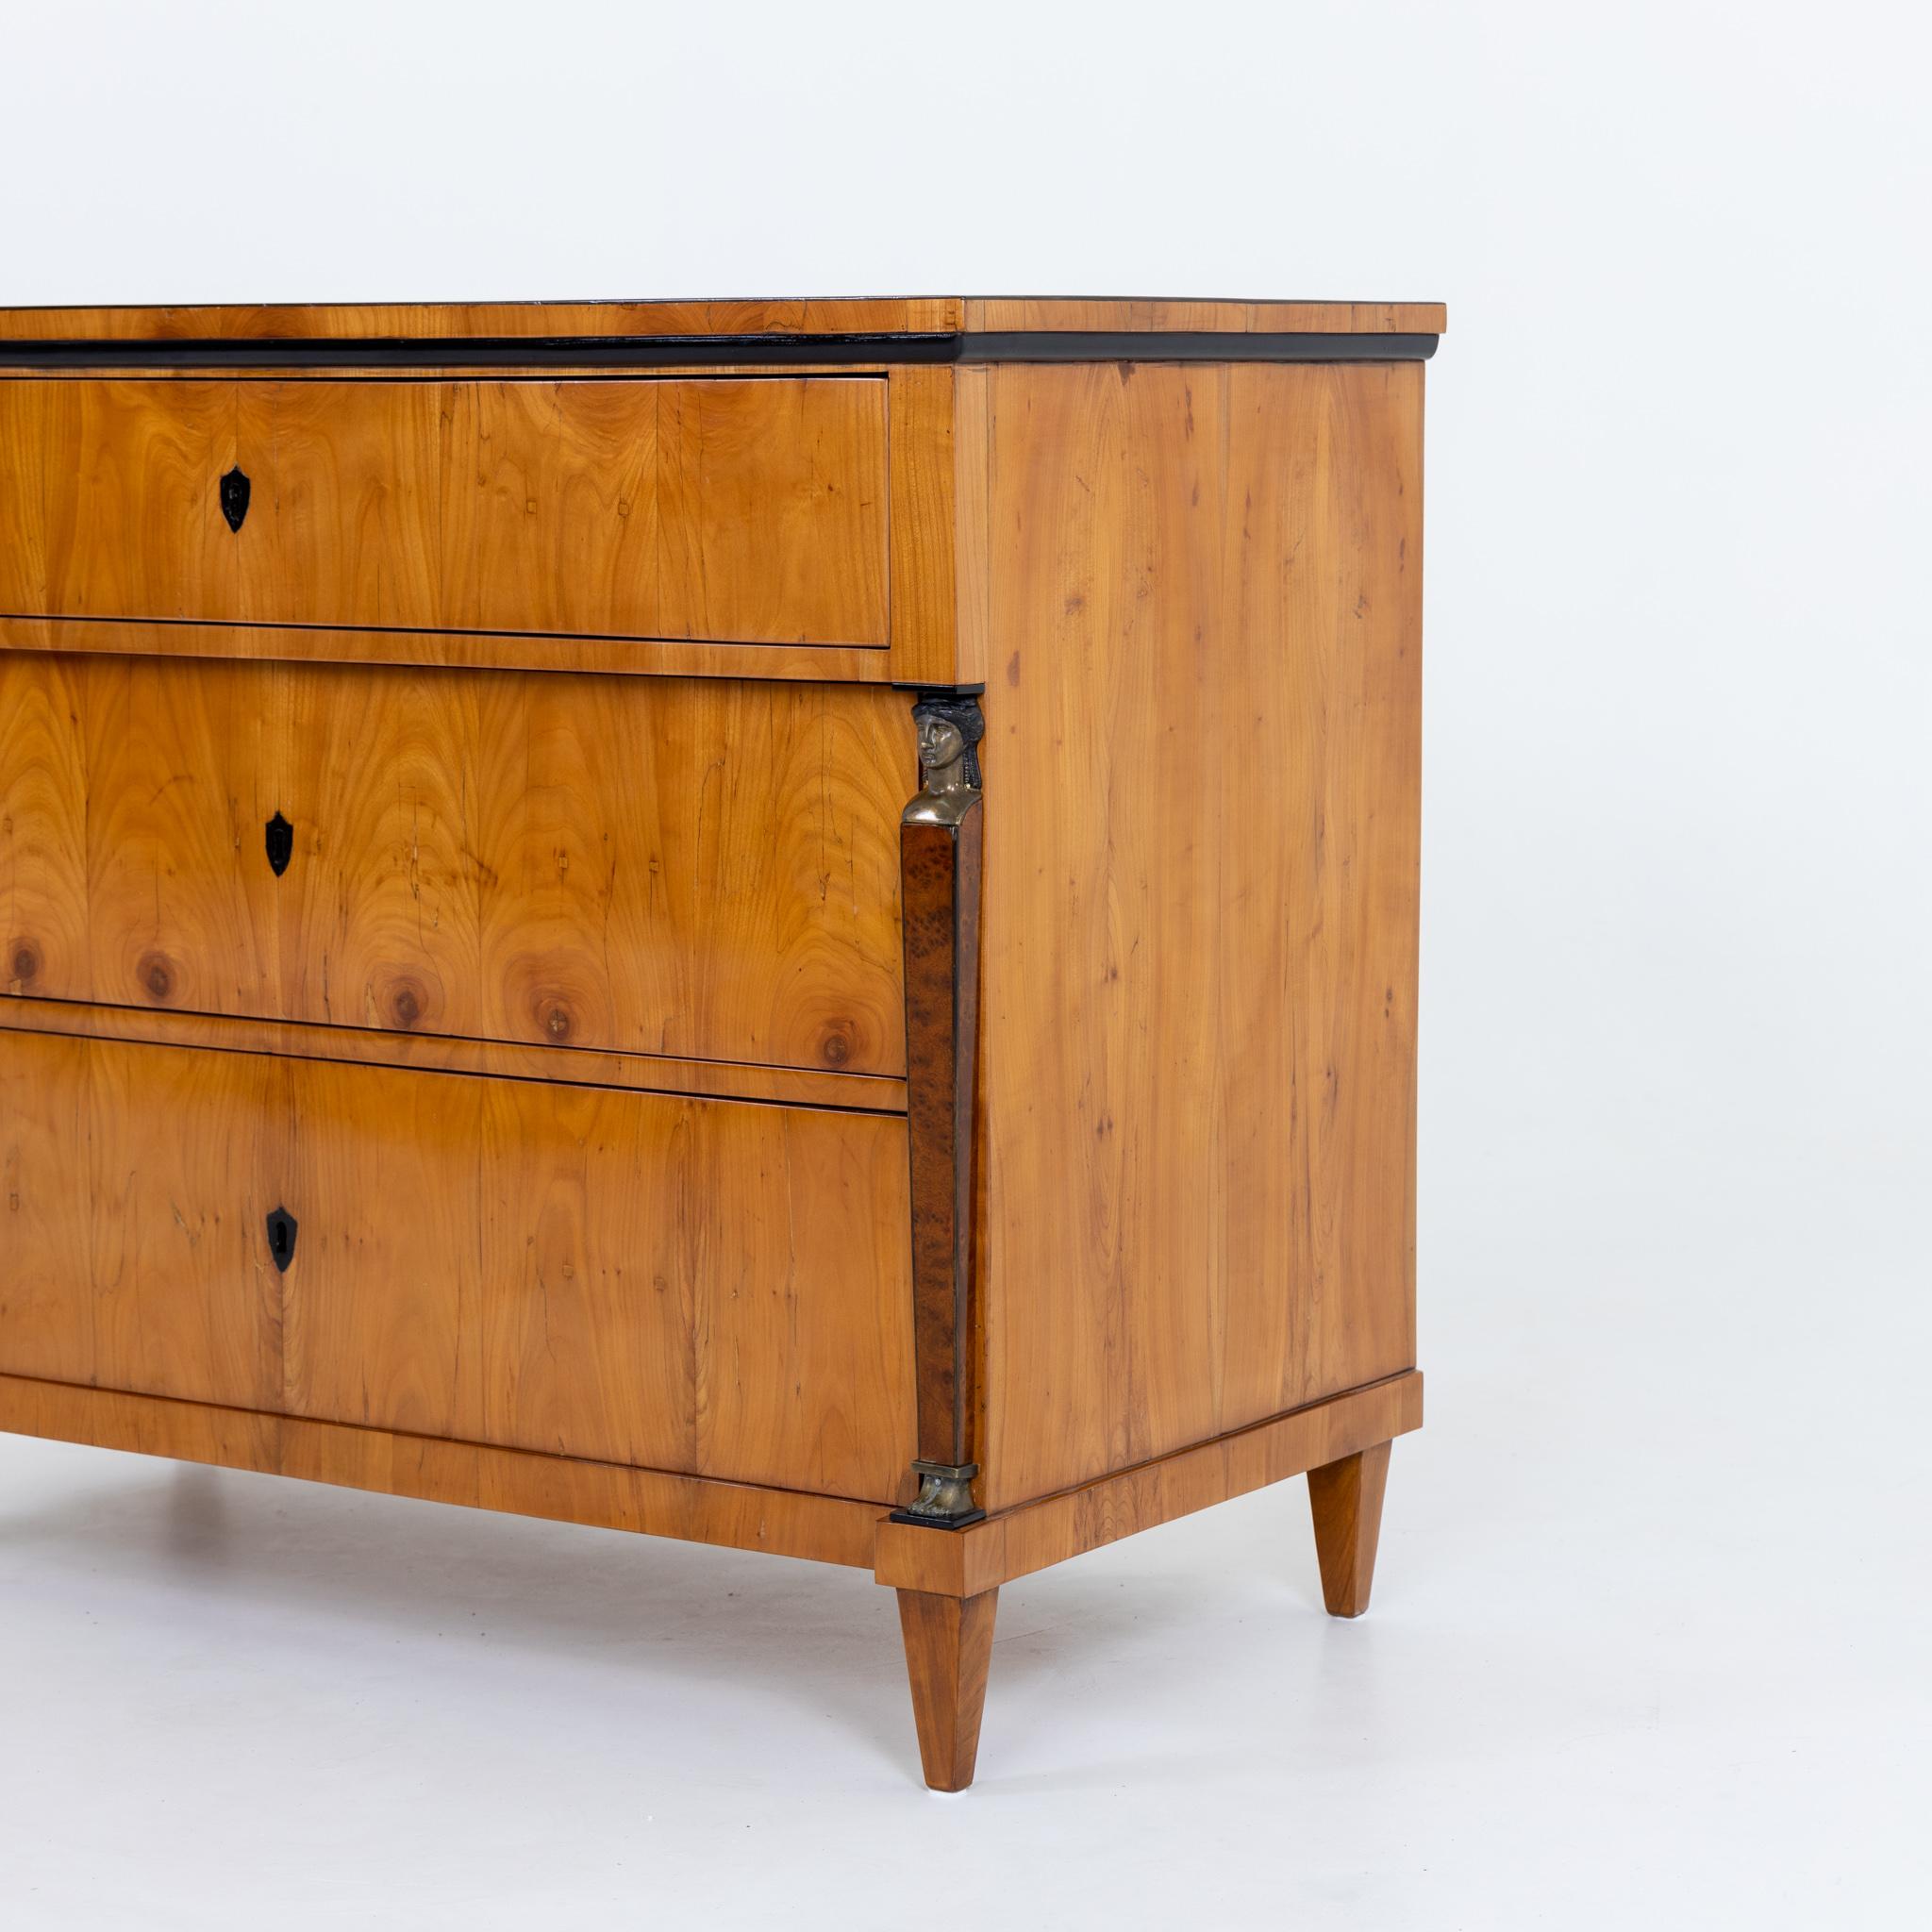 Early 19th Century Biedermeier Chest of Drawers, circa 1815